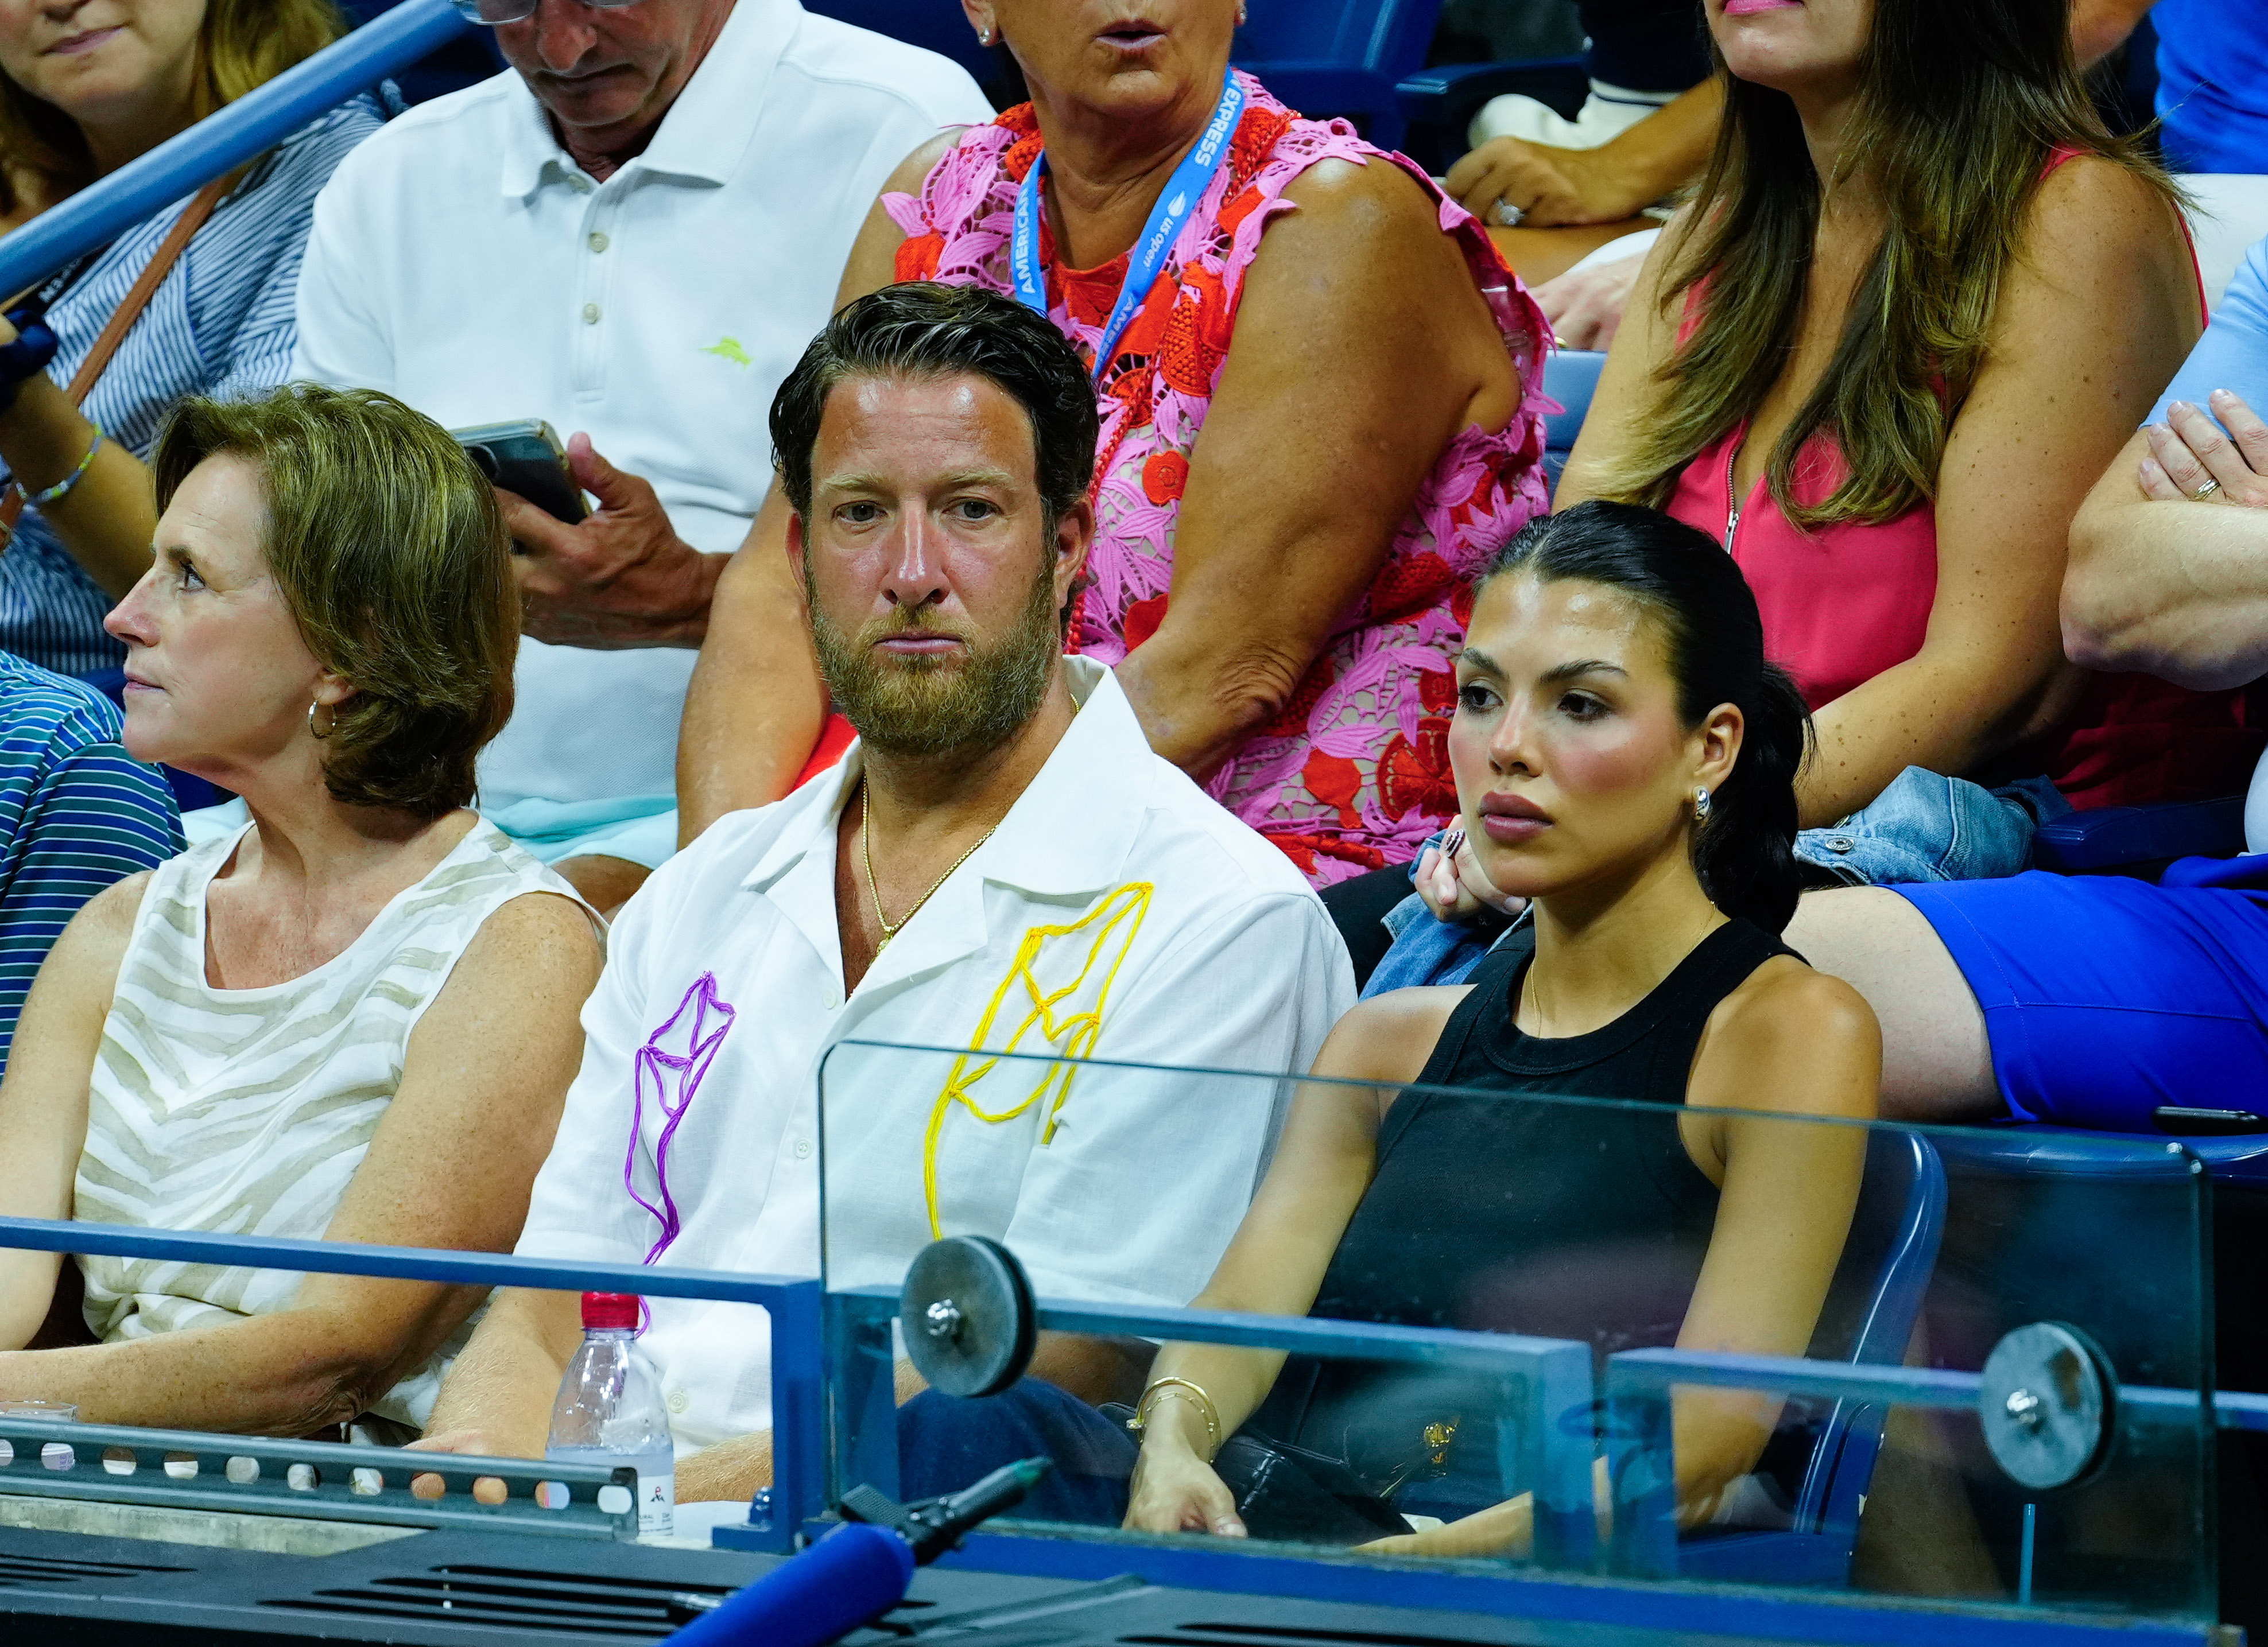 Dave Portnoy at the U.S. Open.